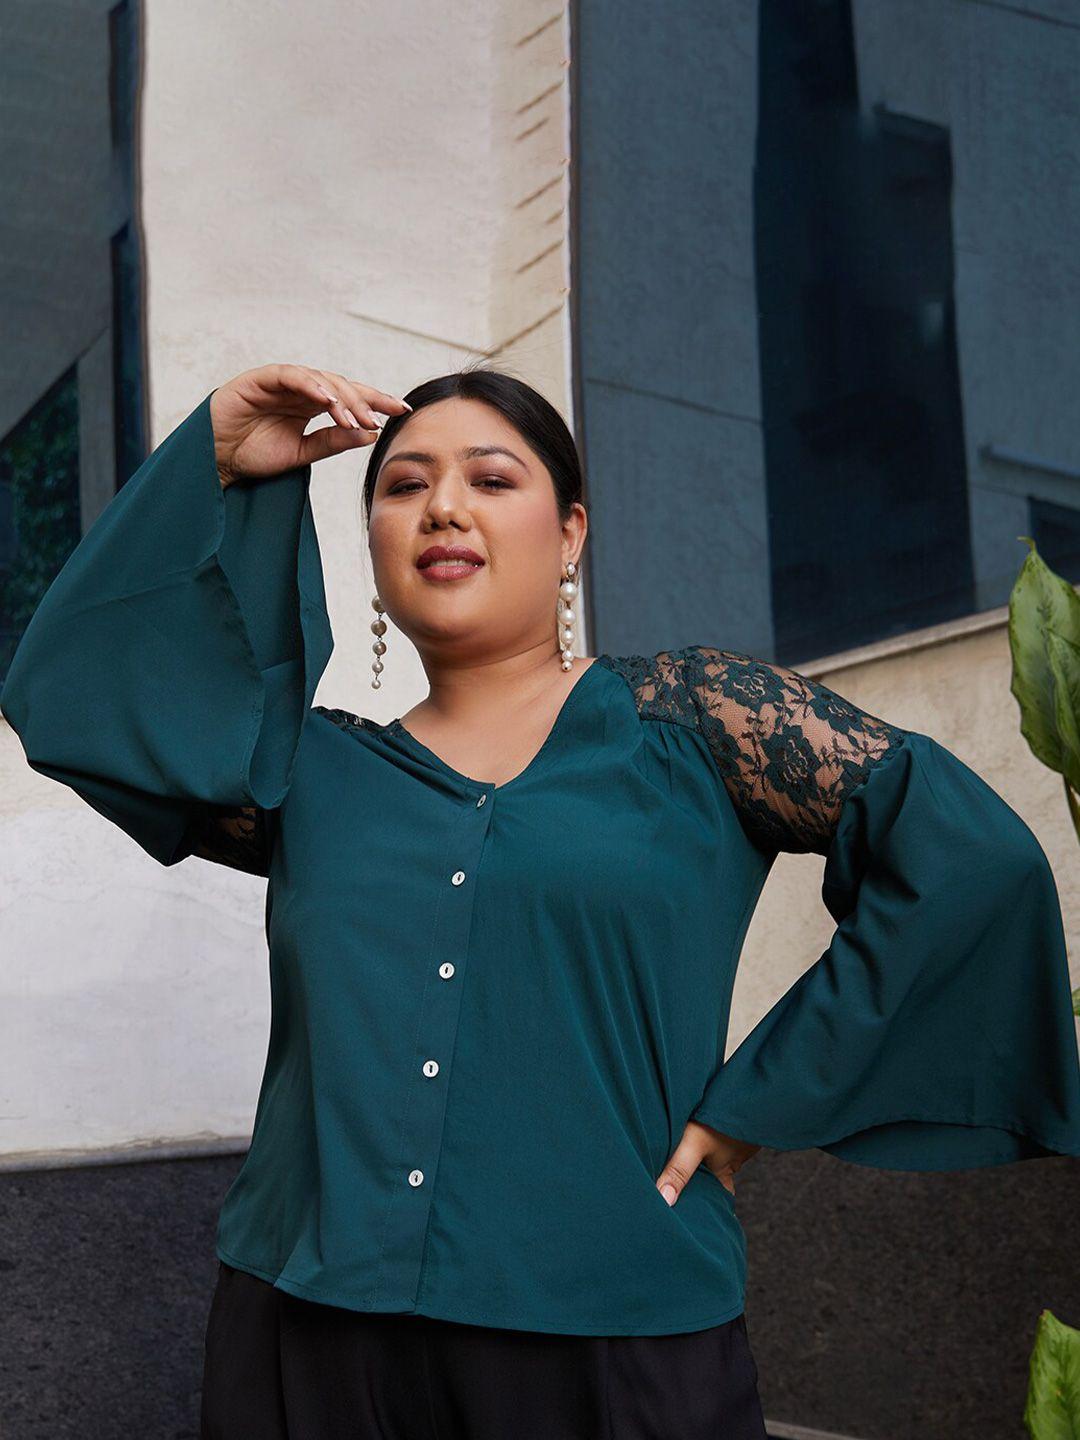 curve-by-kassually-teal-green-plus-size-v-neck-bell-sleeve-lace-detailed-top